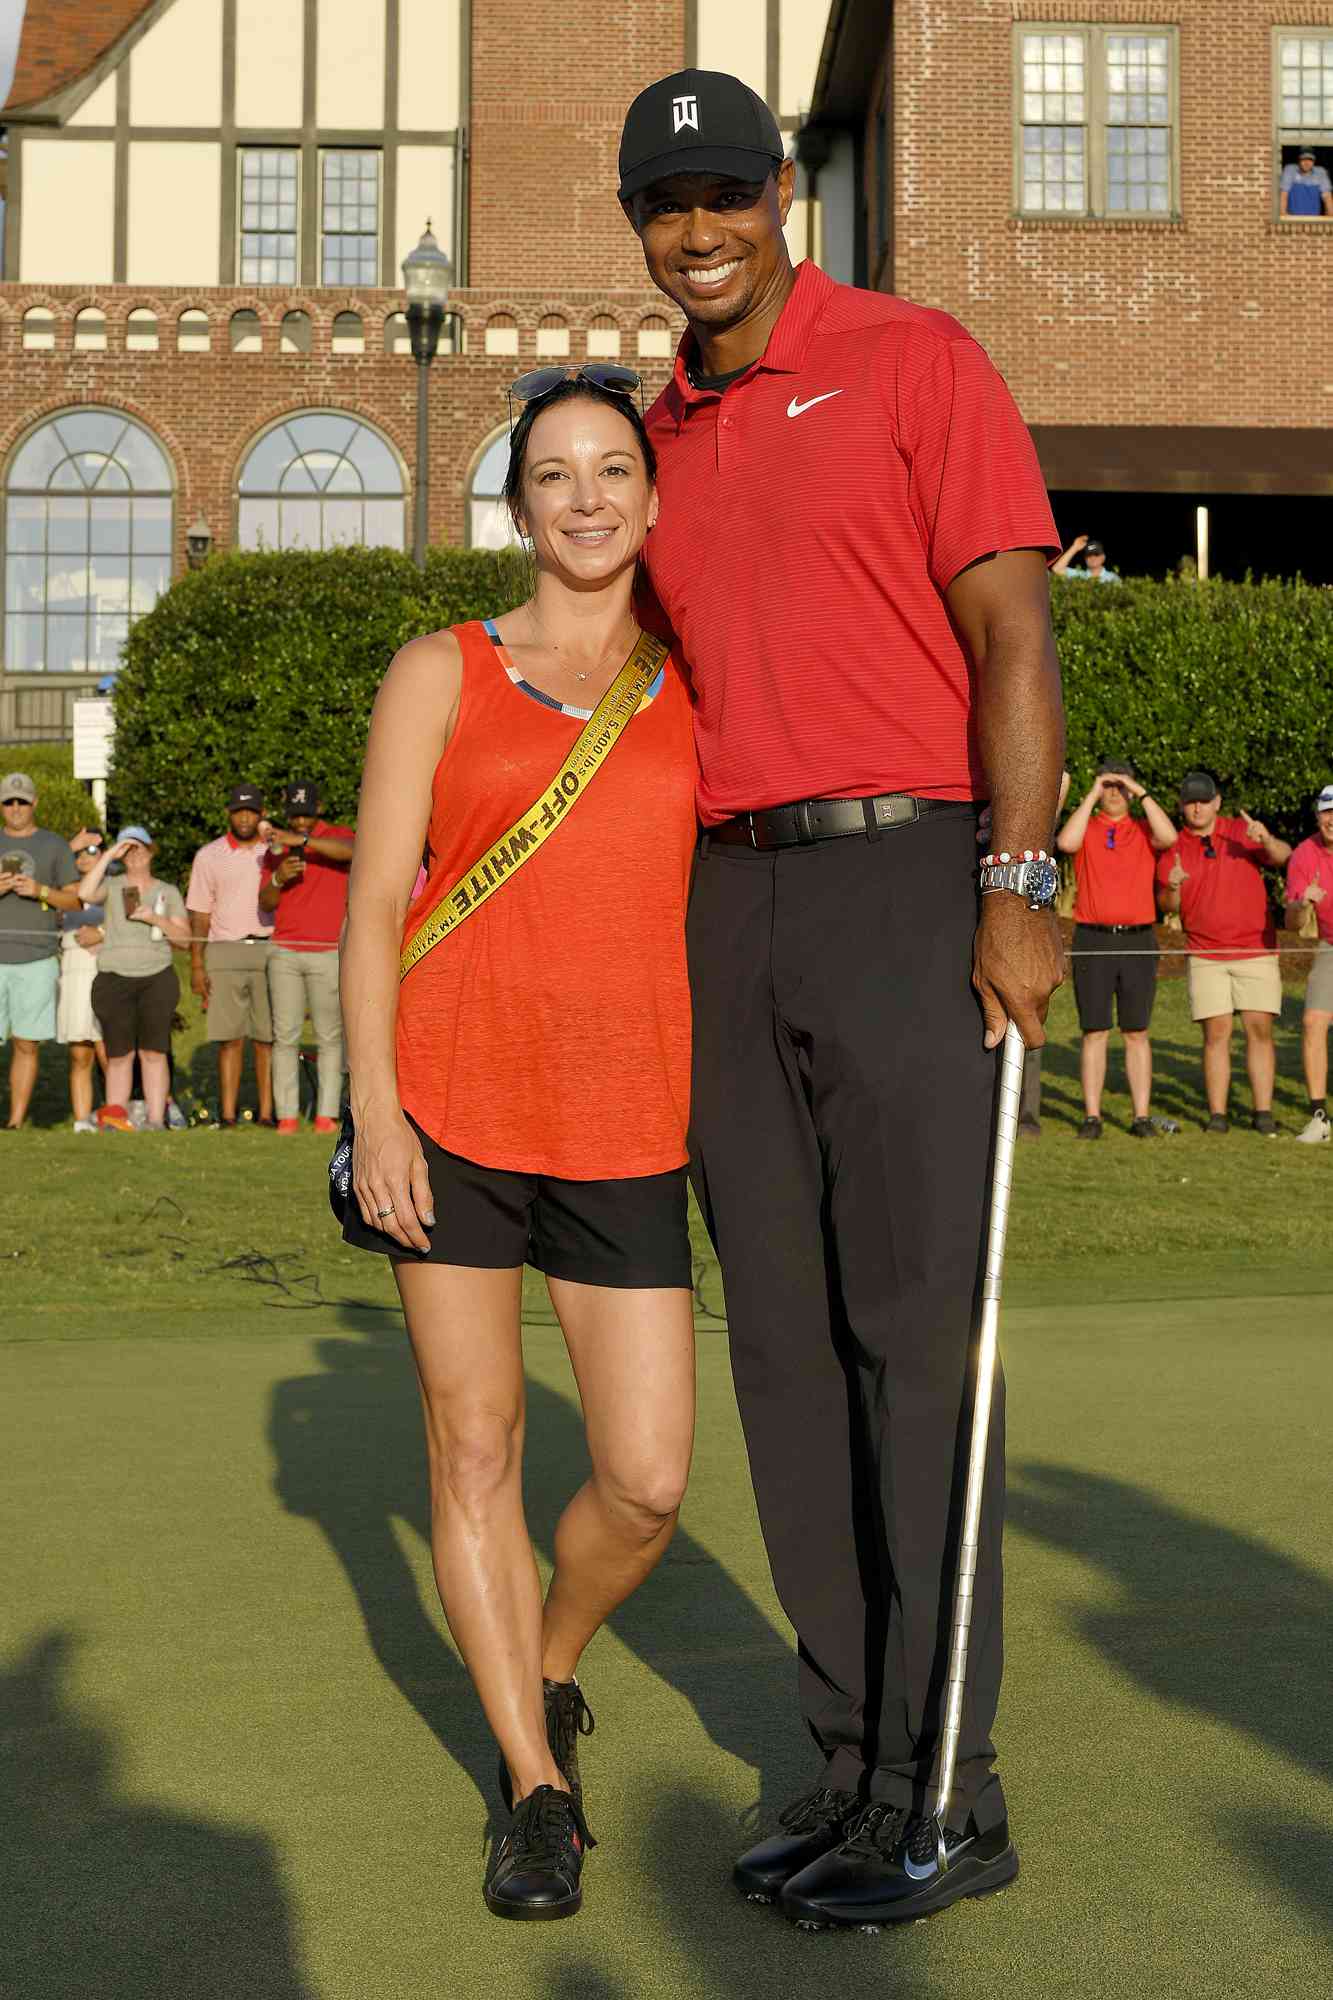 Is dating who today tiger Tiger Woods'